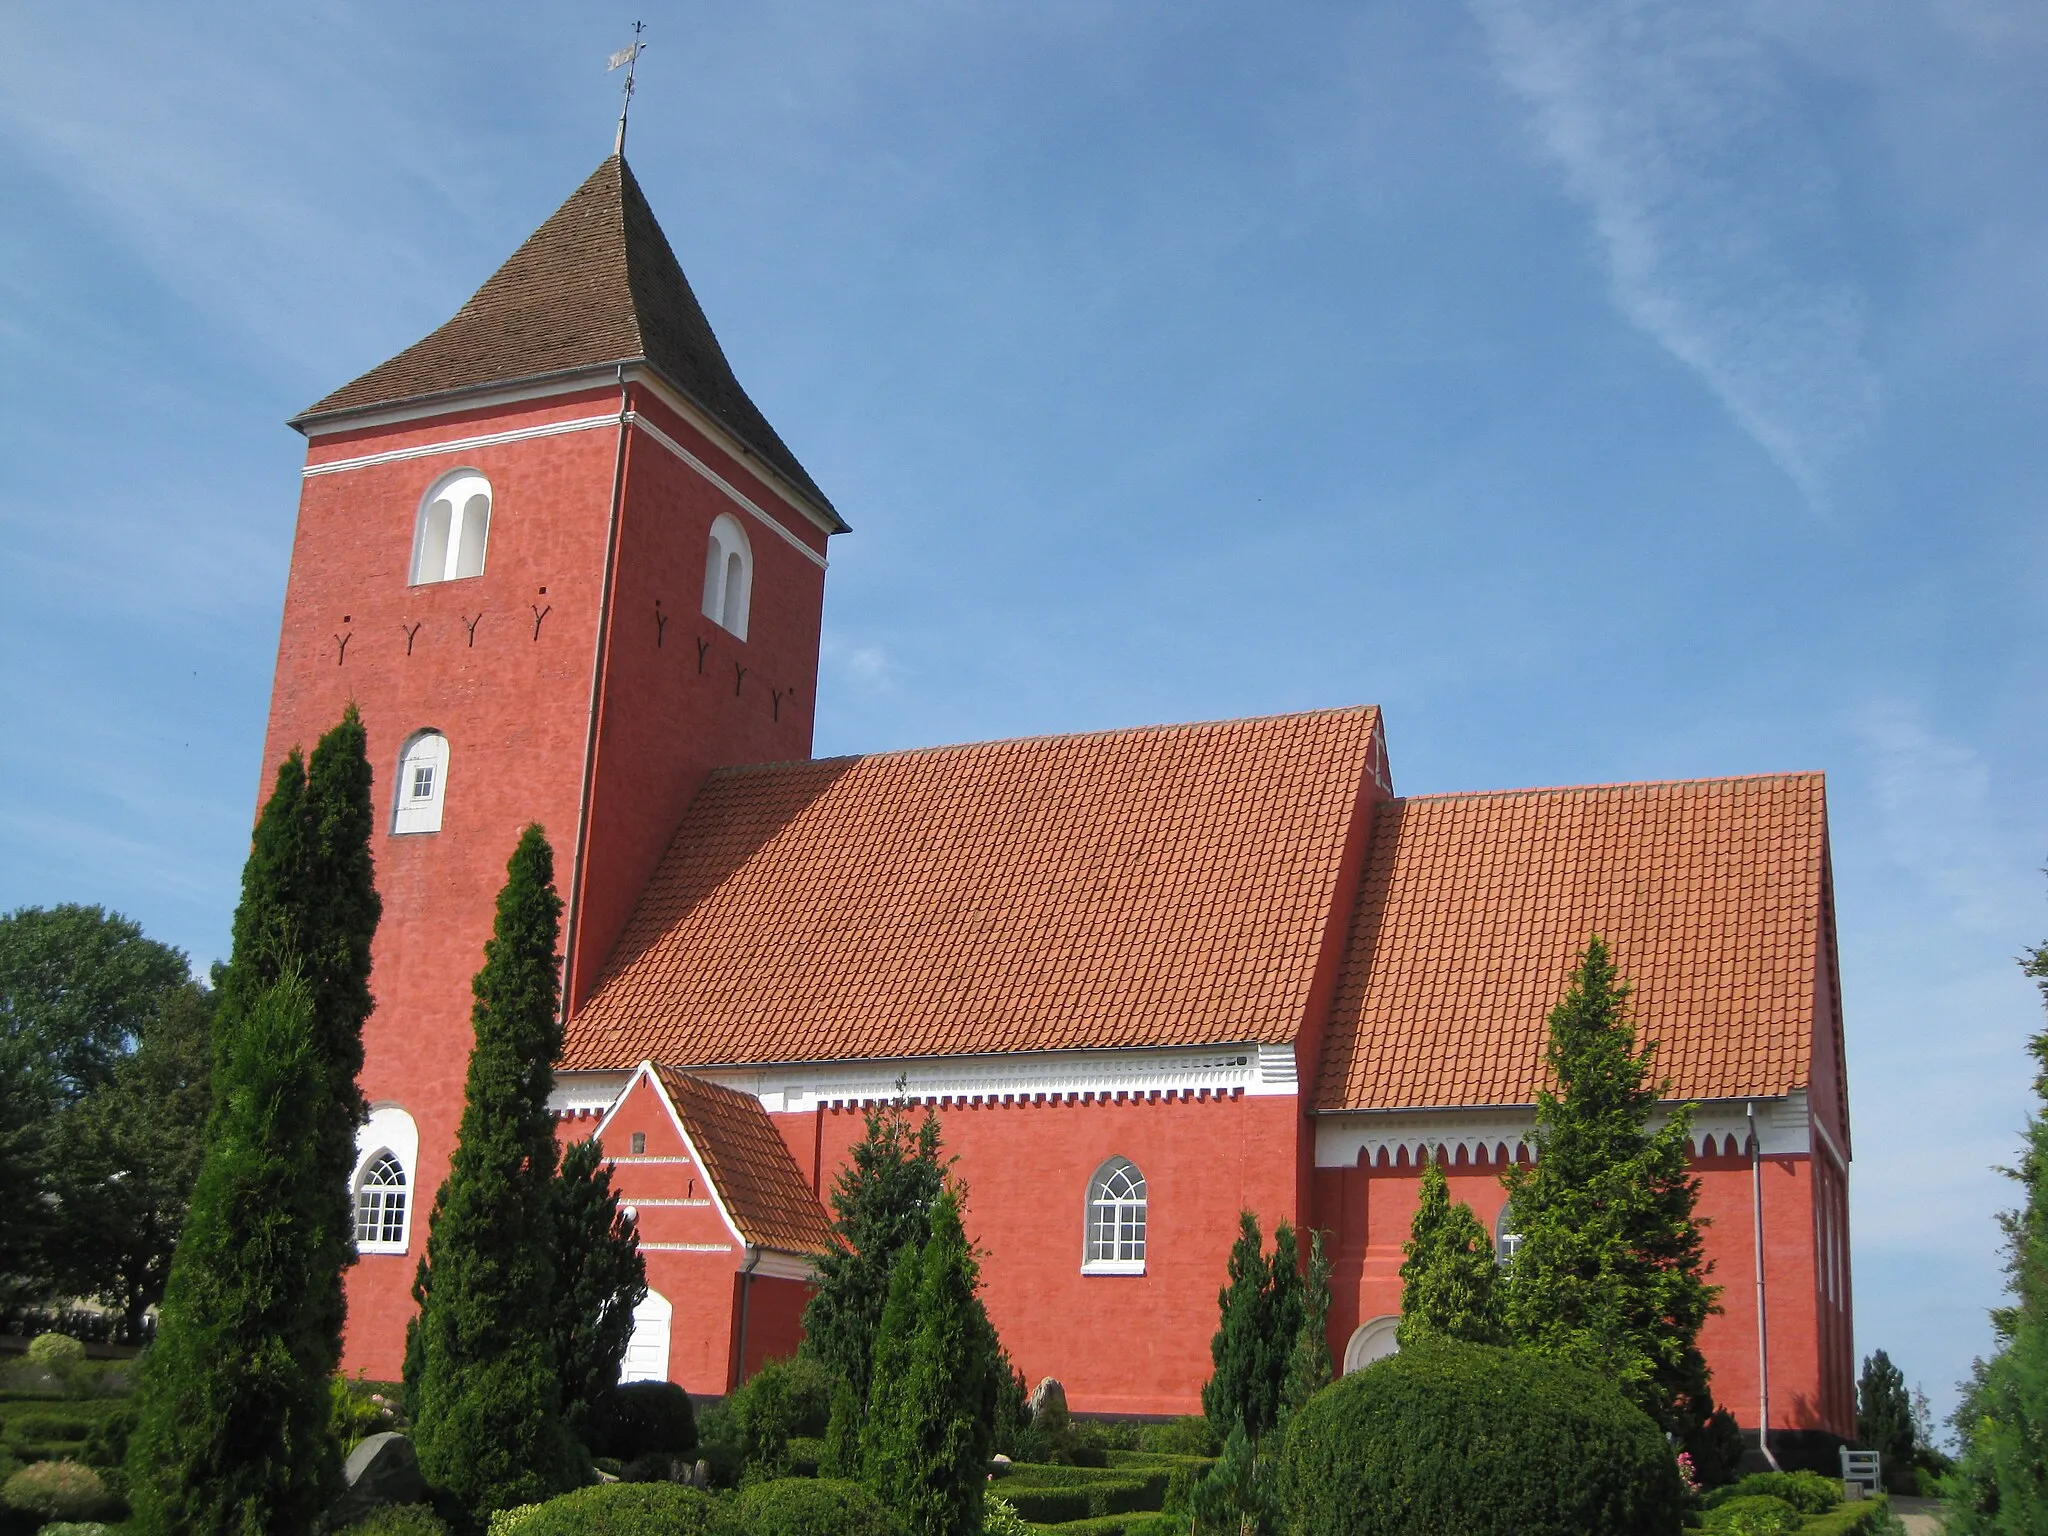 Photo showing: The church "Våbensted Kirke" in the village "Våbensted". The village is located on the island Lolland in east Denmark.